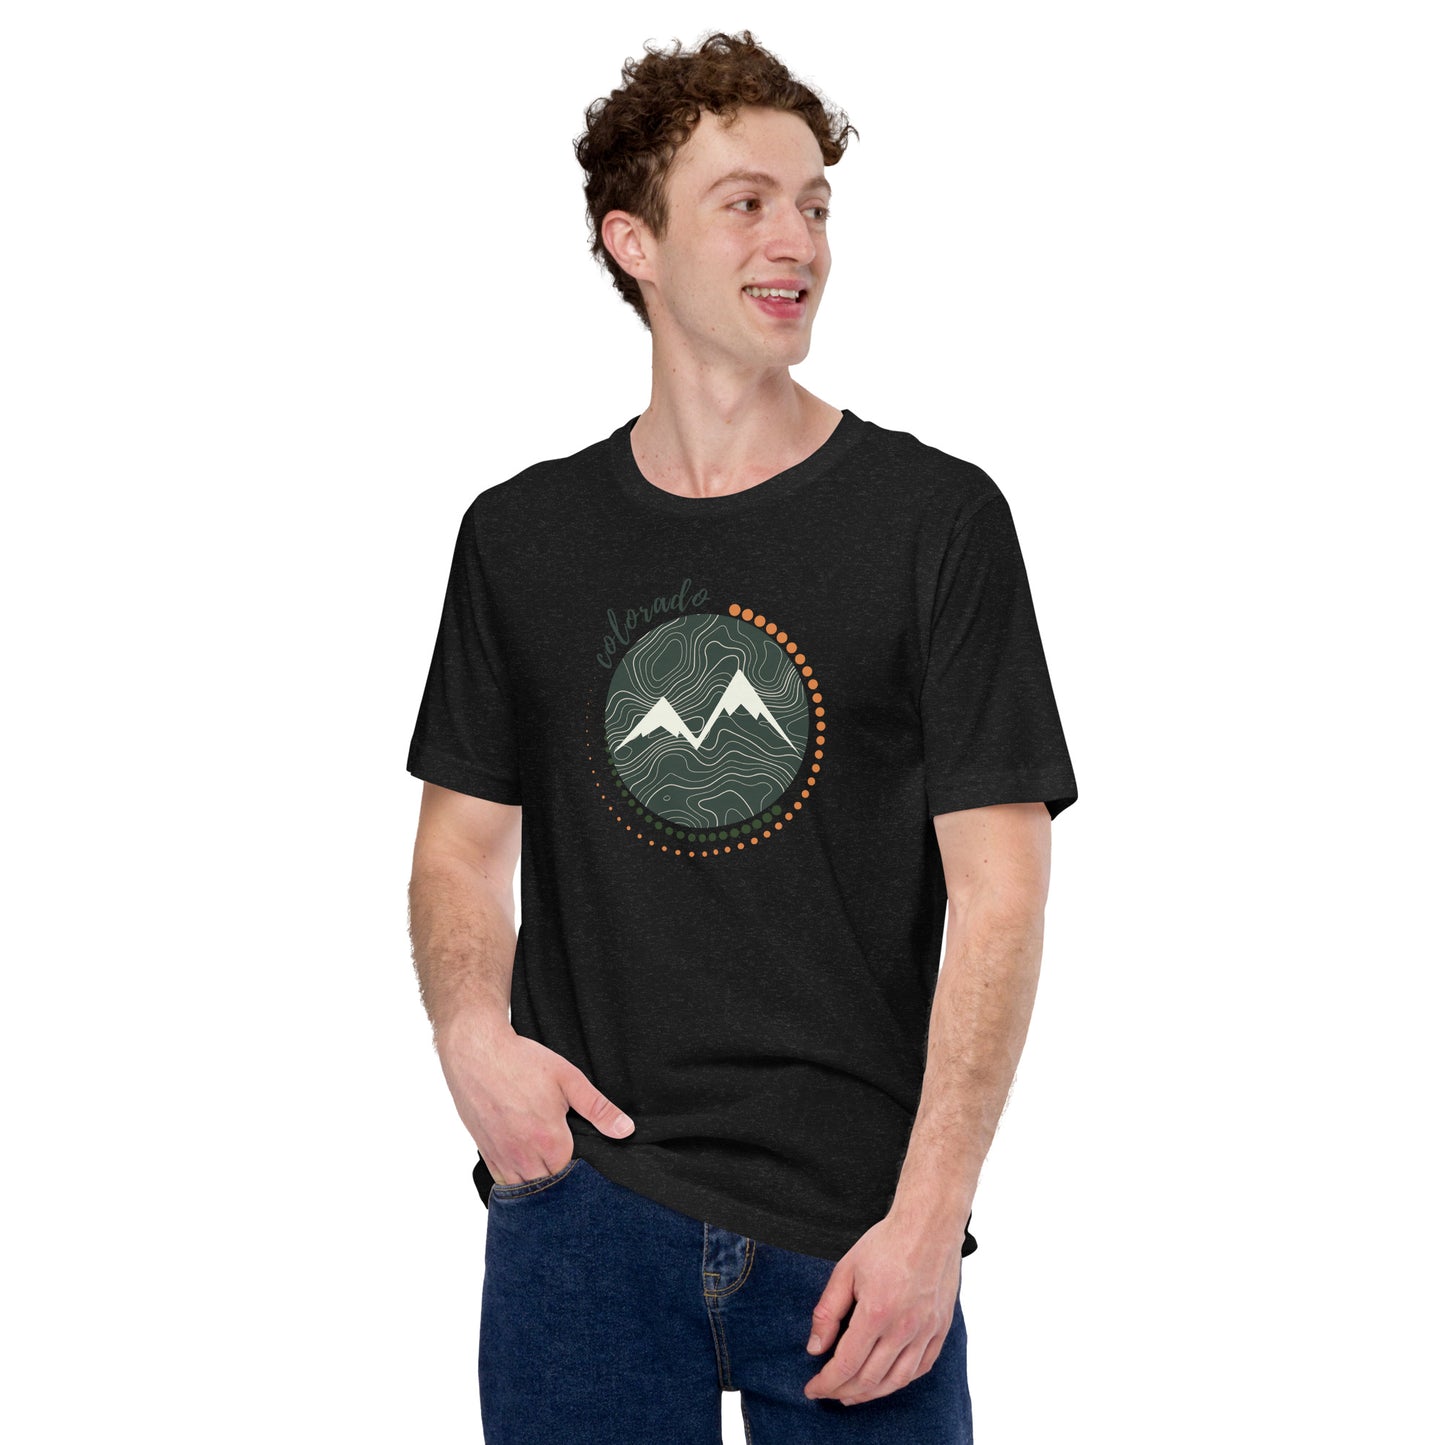 explore colorado tshirt t-shirt bella canvas graphic camp camping outside outdoors clothing comfy elevation climb hike hiking mountain peak topography map